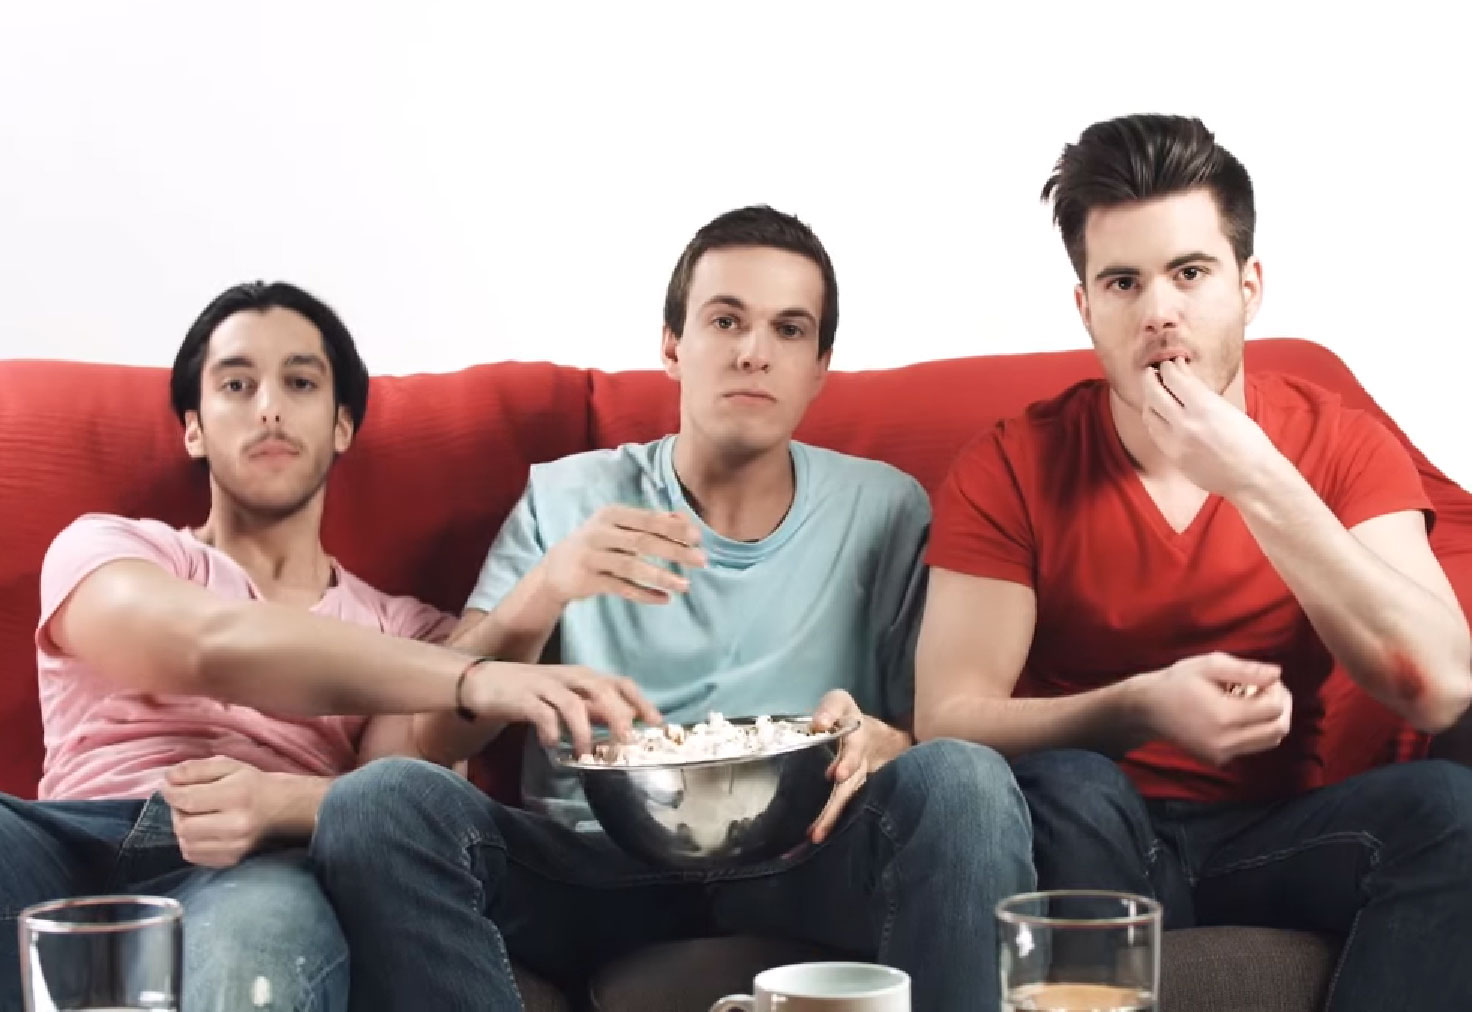 Three young man eat popcorn red counch